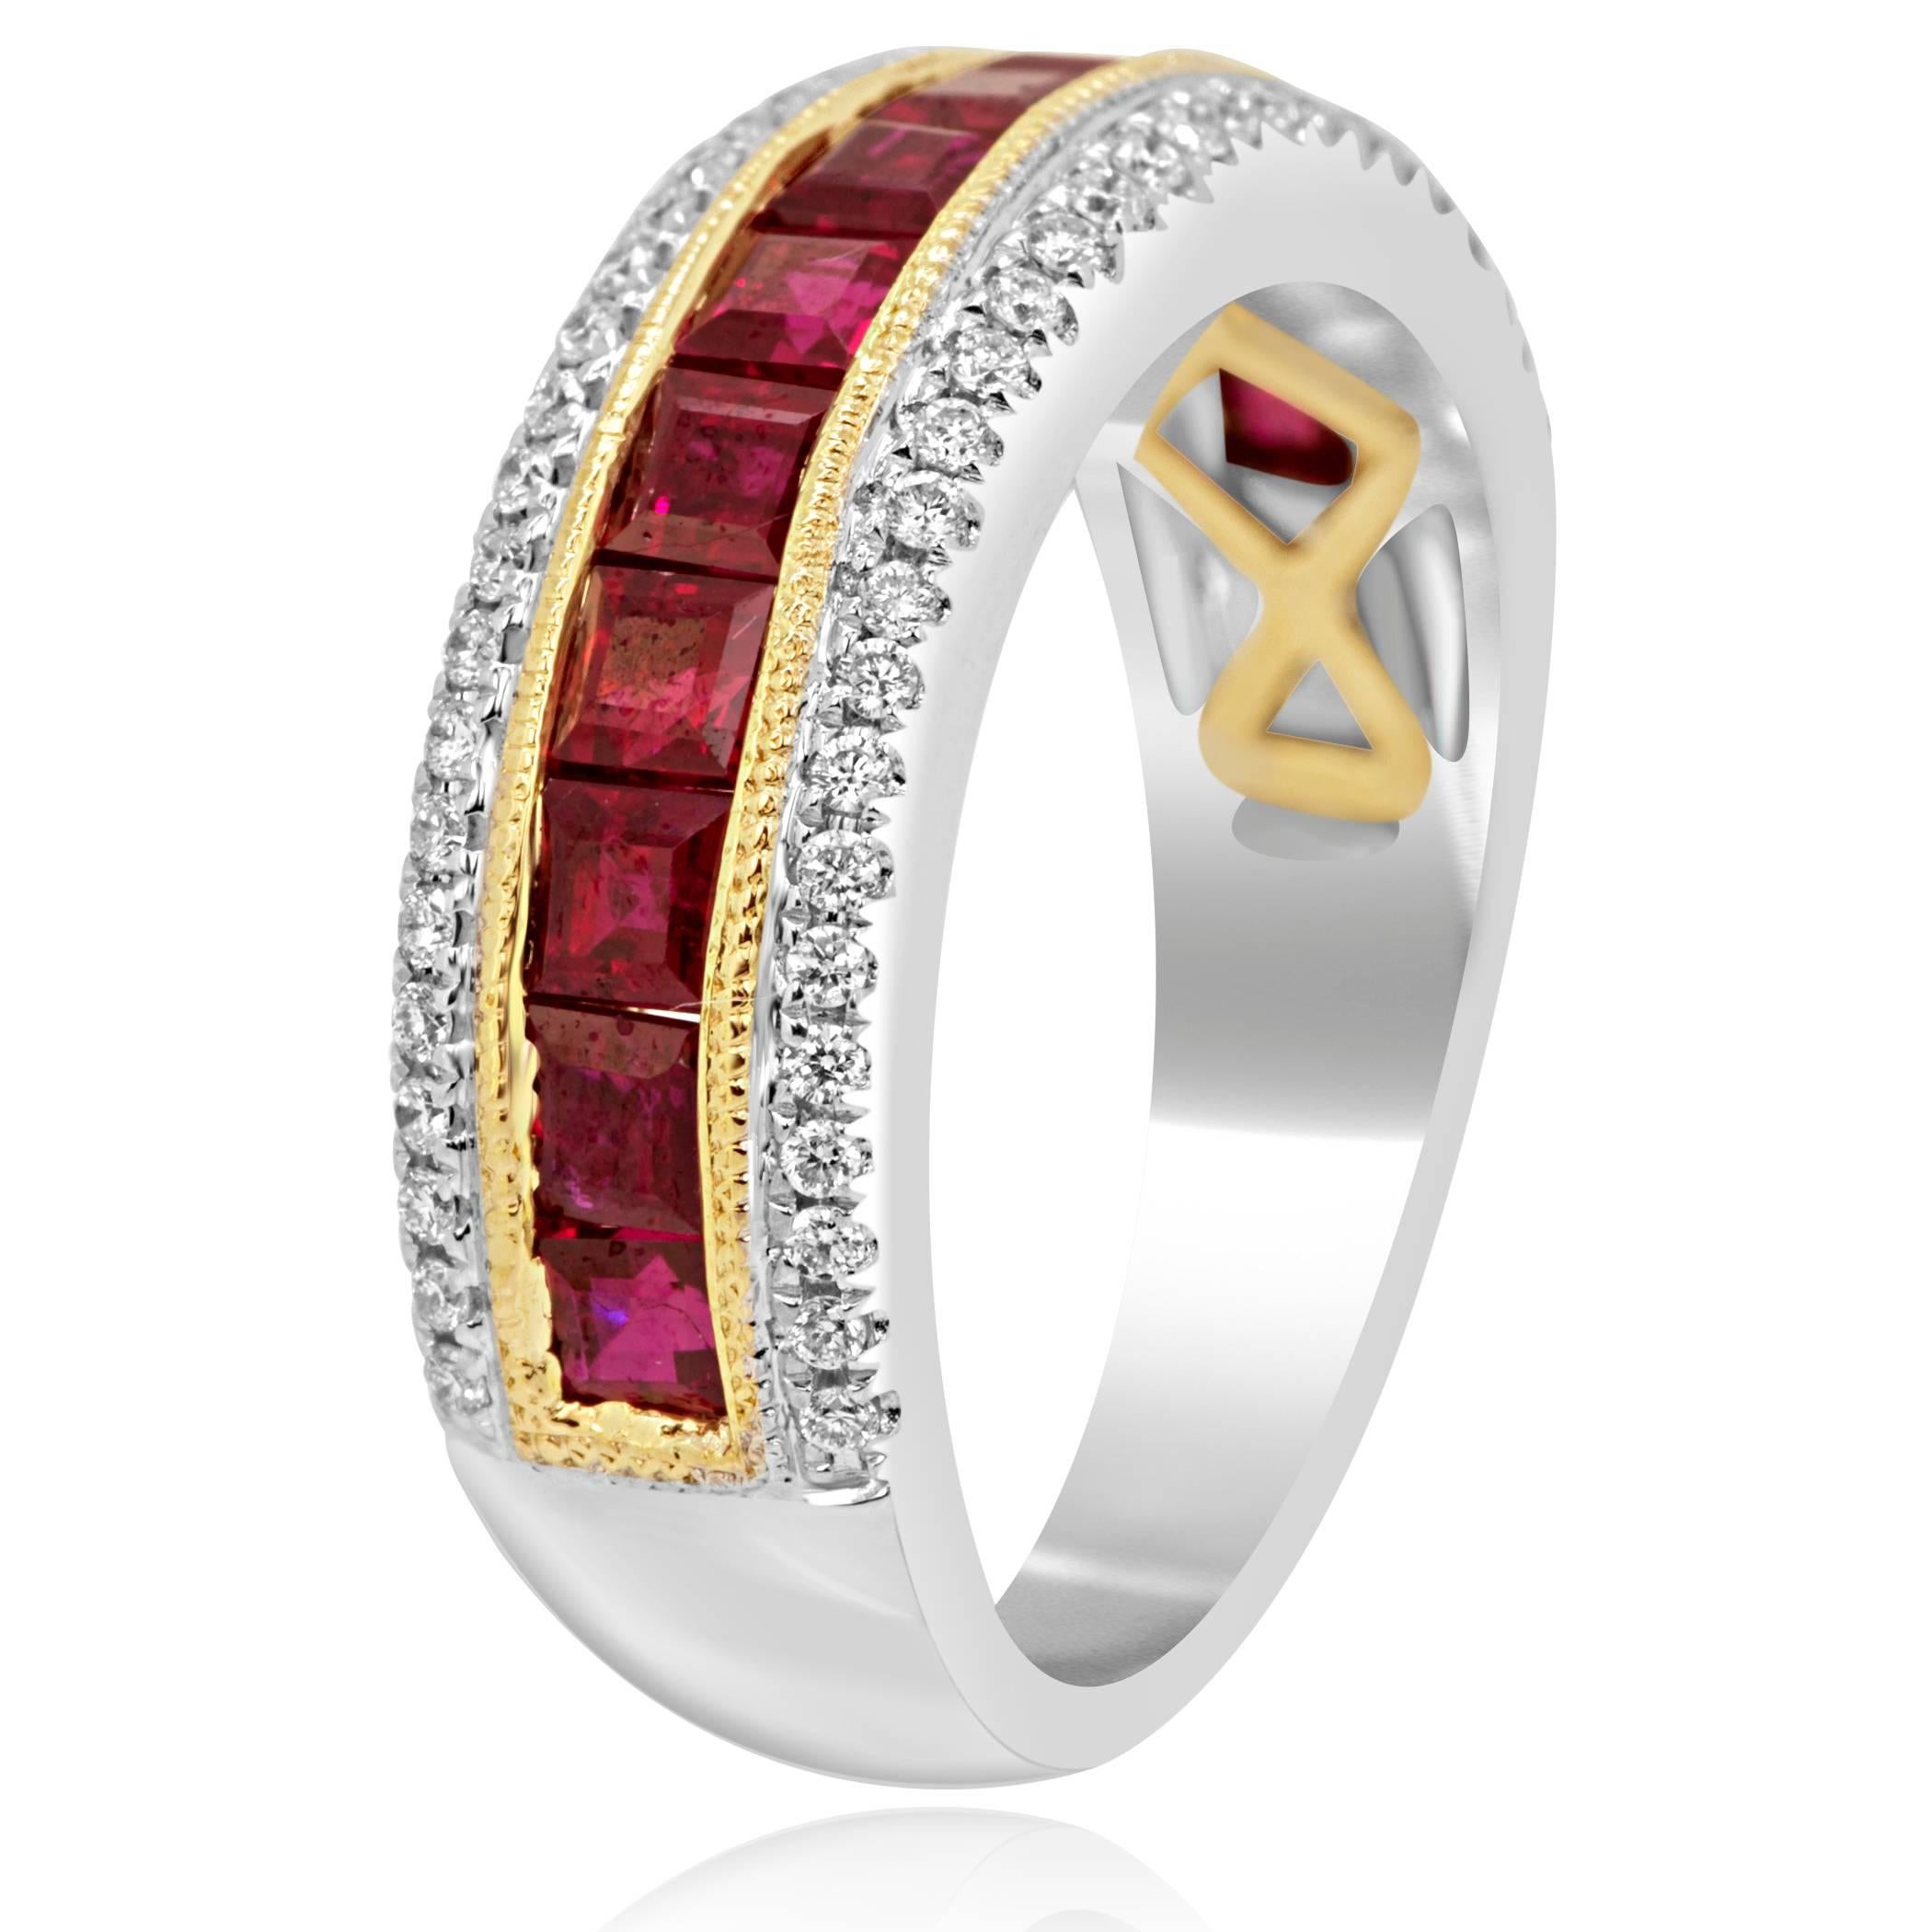 Ruby Square cut 1.79 Carat in channel setting Flanked with round white diamonds 0.24 Carat in 14K White and Yellow Gold Fashion Ring Band.

Total Stone Weight 2.03 Carat